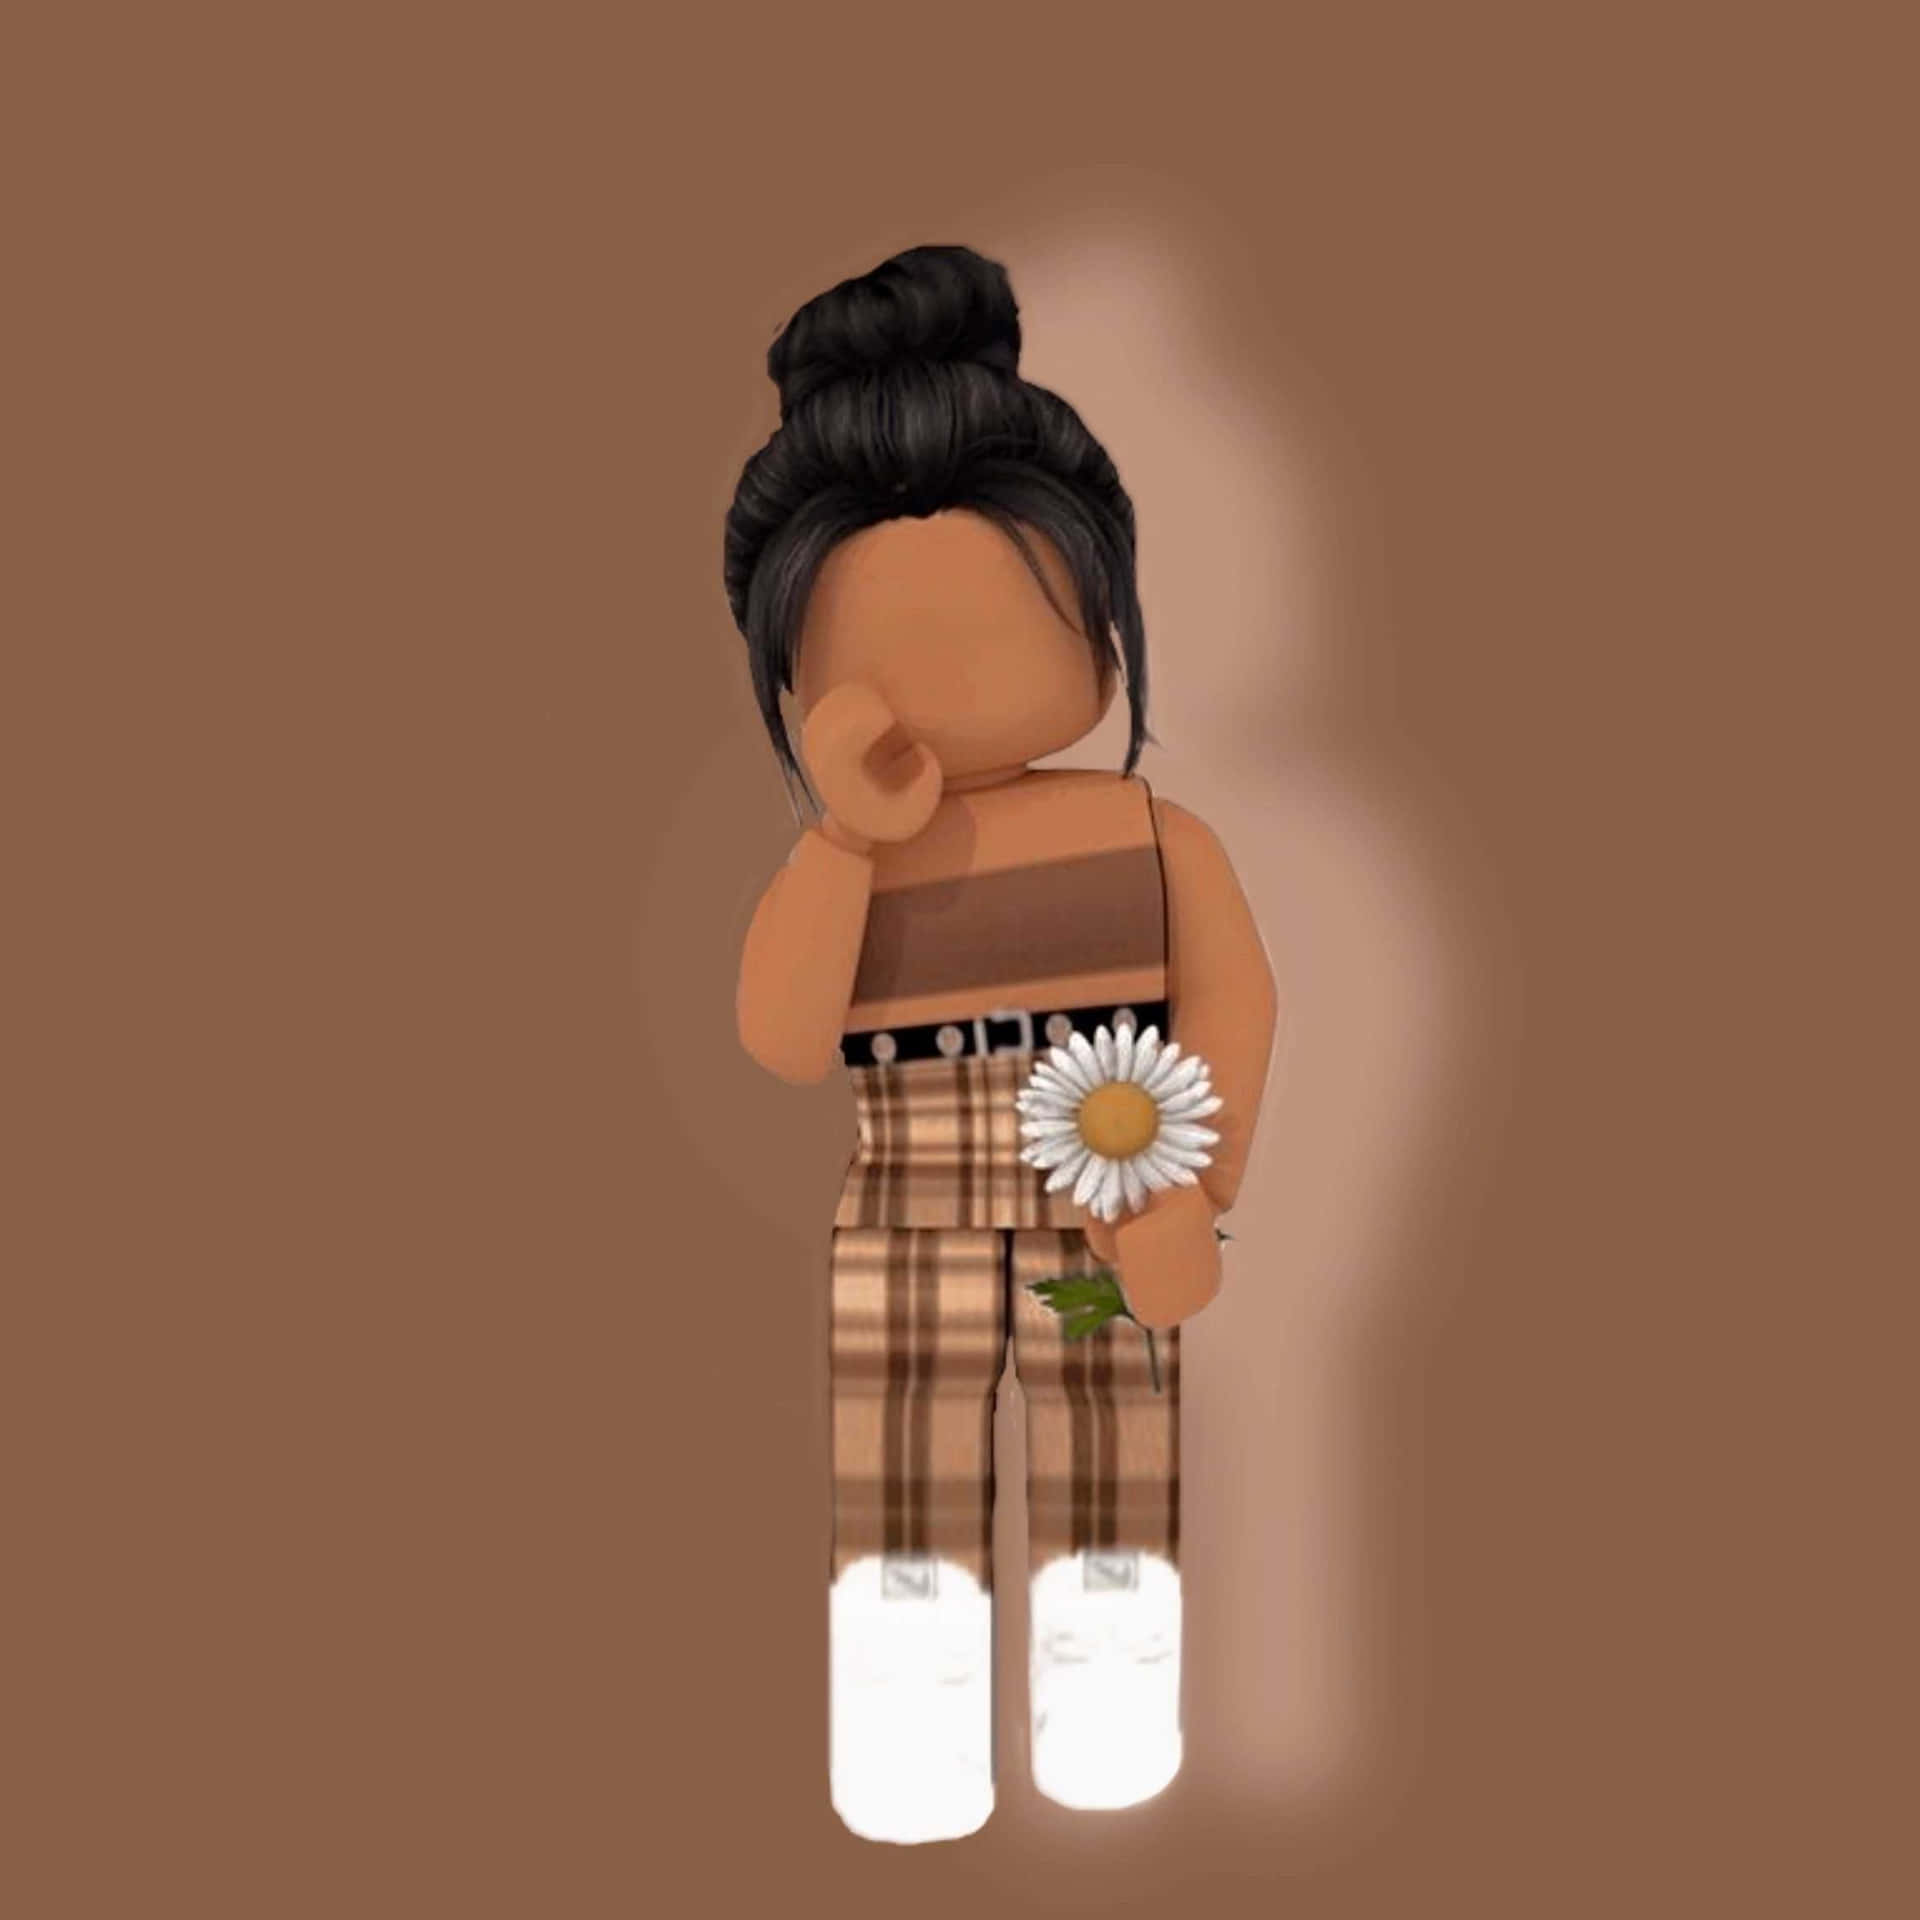 Aesthetic Roblox Girl  Roblox pictures, Roblox animation, Cute